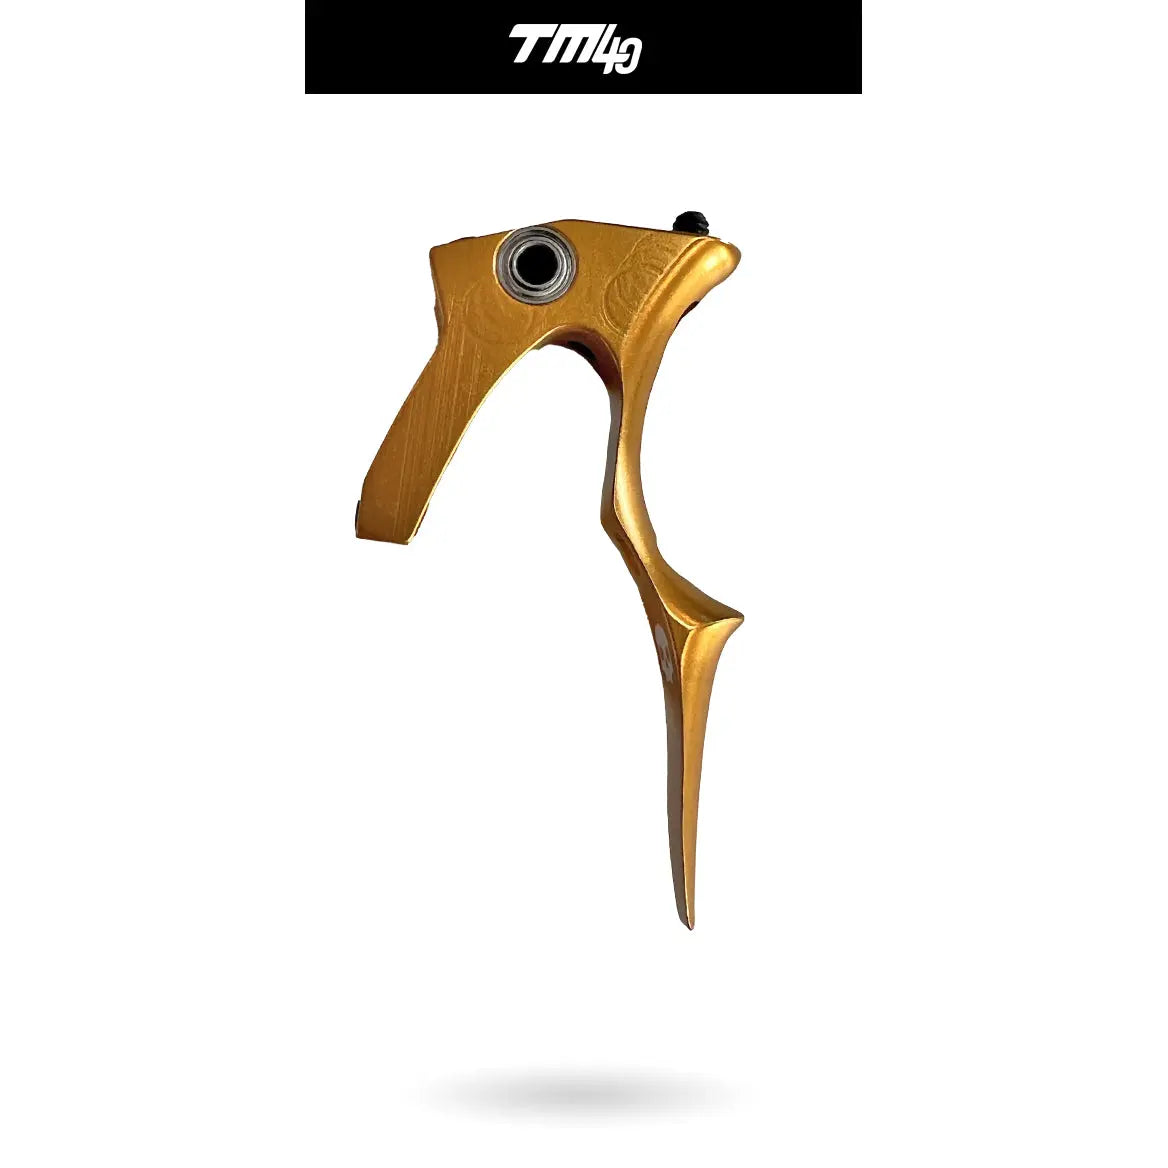 LUXE DEUCE TRIGGER - TM40 Infamous Paintball